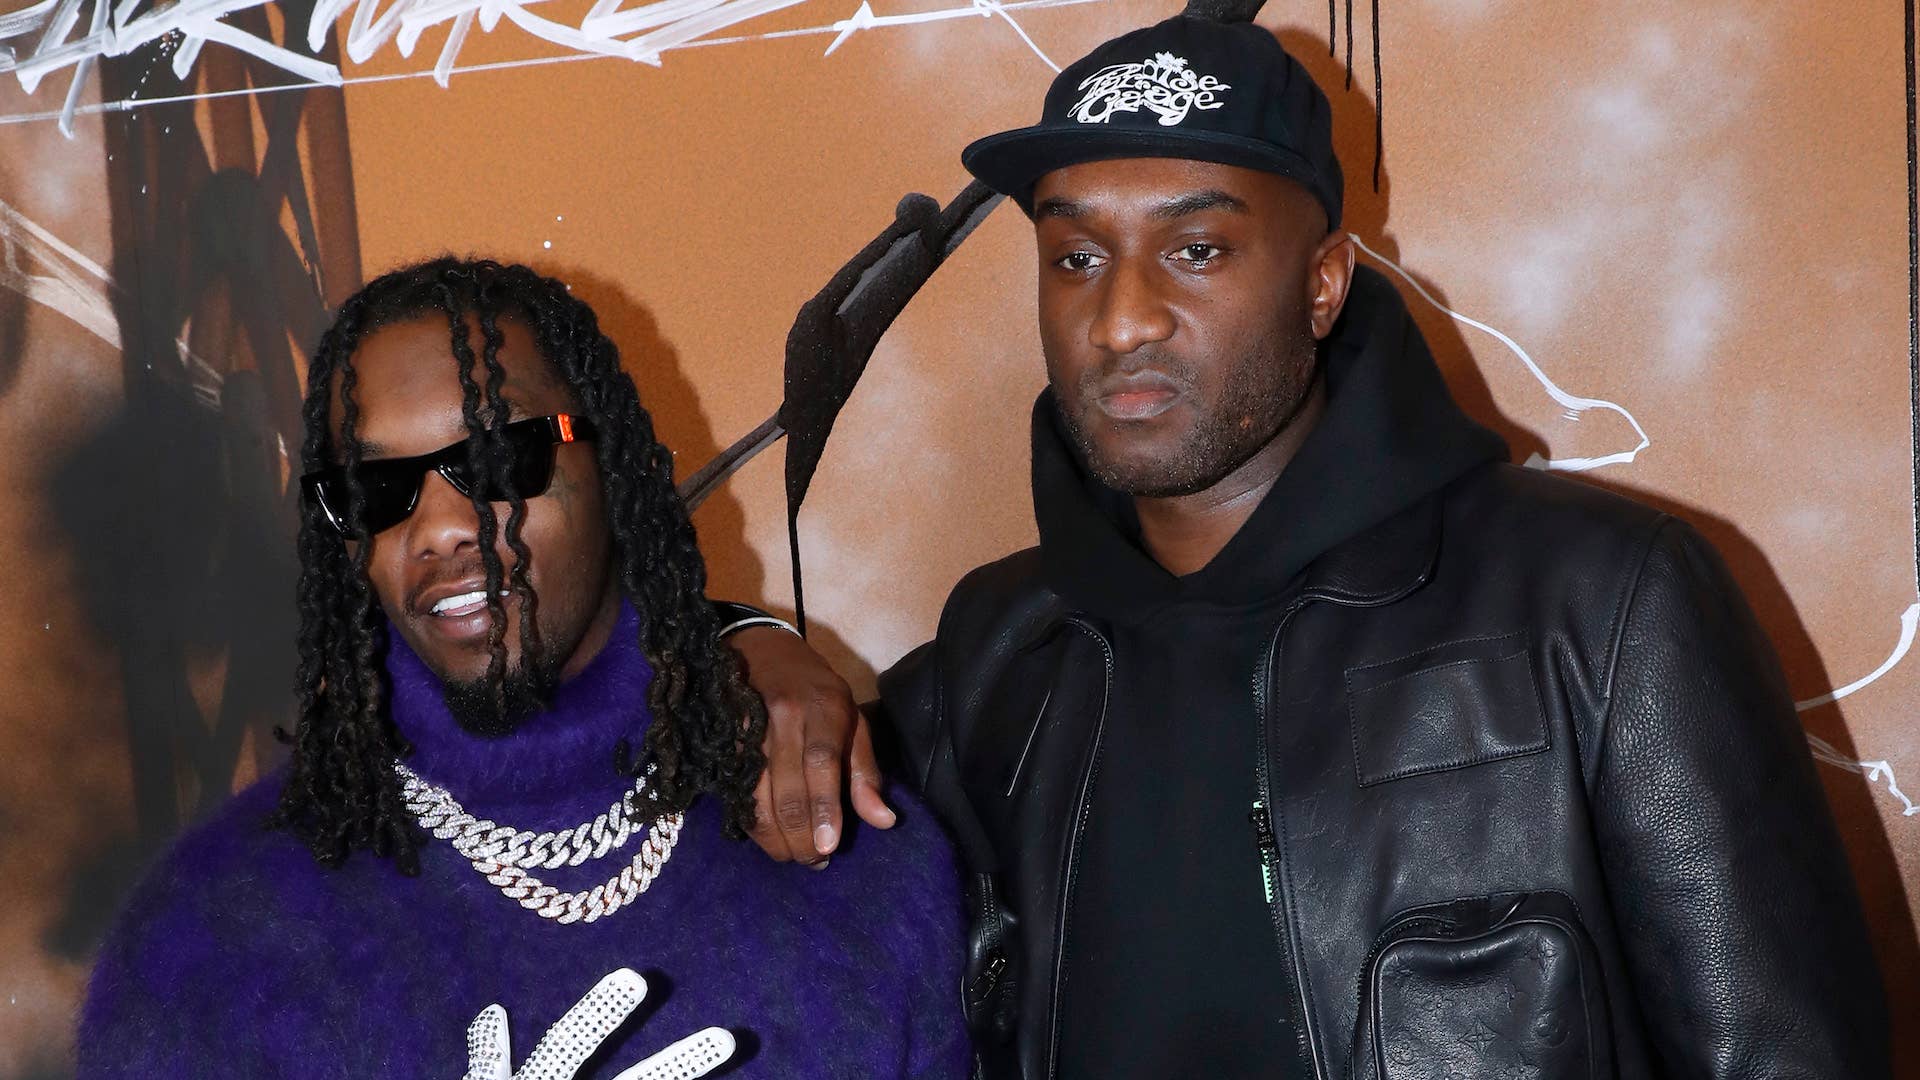 Rapper Offset and Stylist Virgil Abloh pose after the Louis Vuitton Menswear show.